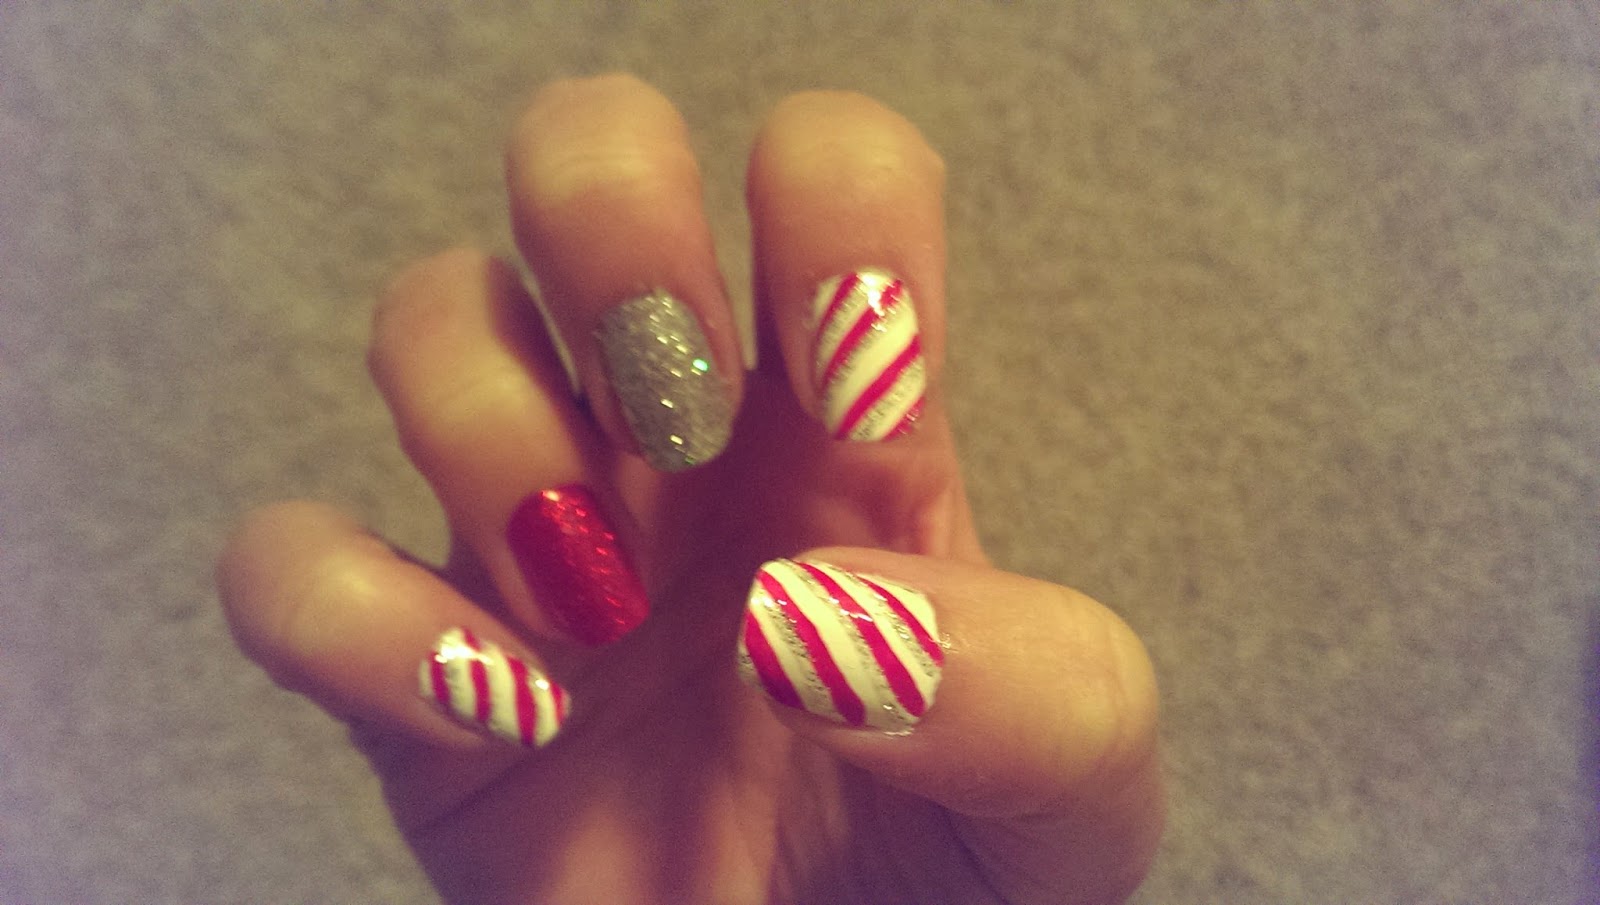 Manicure Monday - Candy Cane Striped Nails! | See the World in PINK